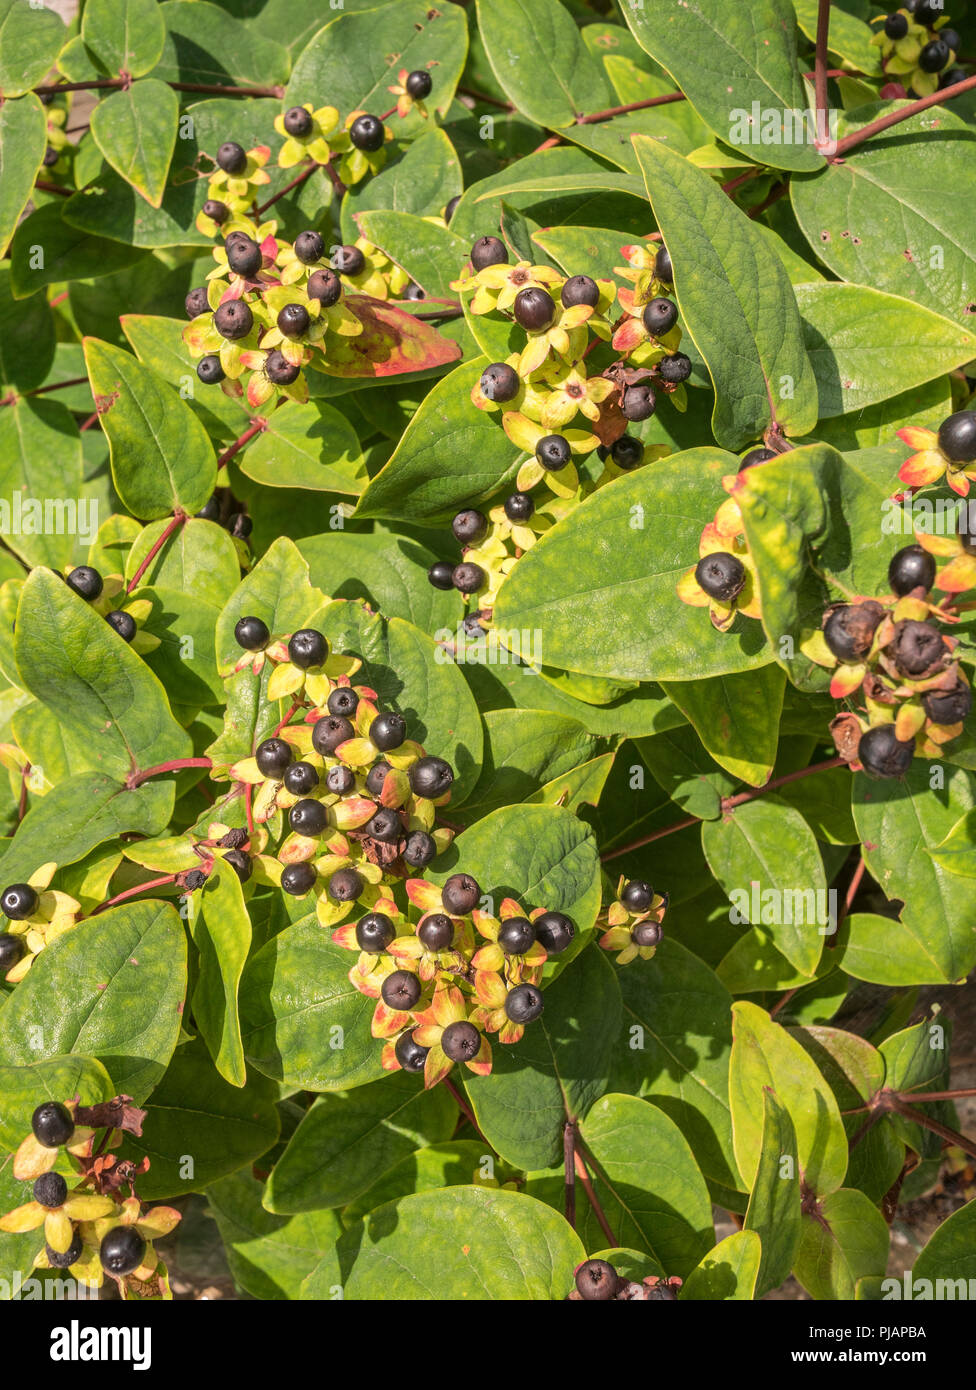 Black berries of Tutsan / Hypericum androsaemum in sunshine. Tutsan was used as a medicinal herbal wound plant, and is related to St. John's Wort. Stock Photo